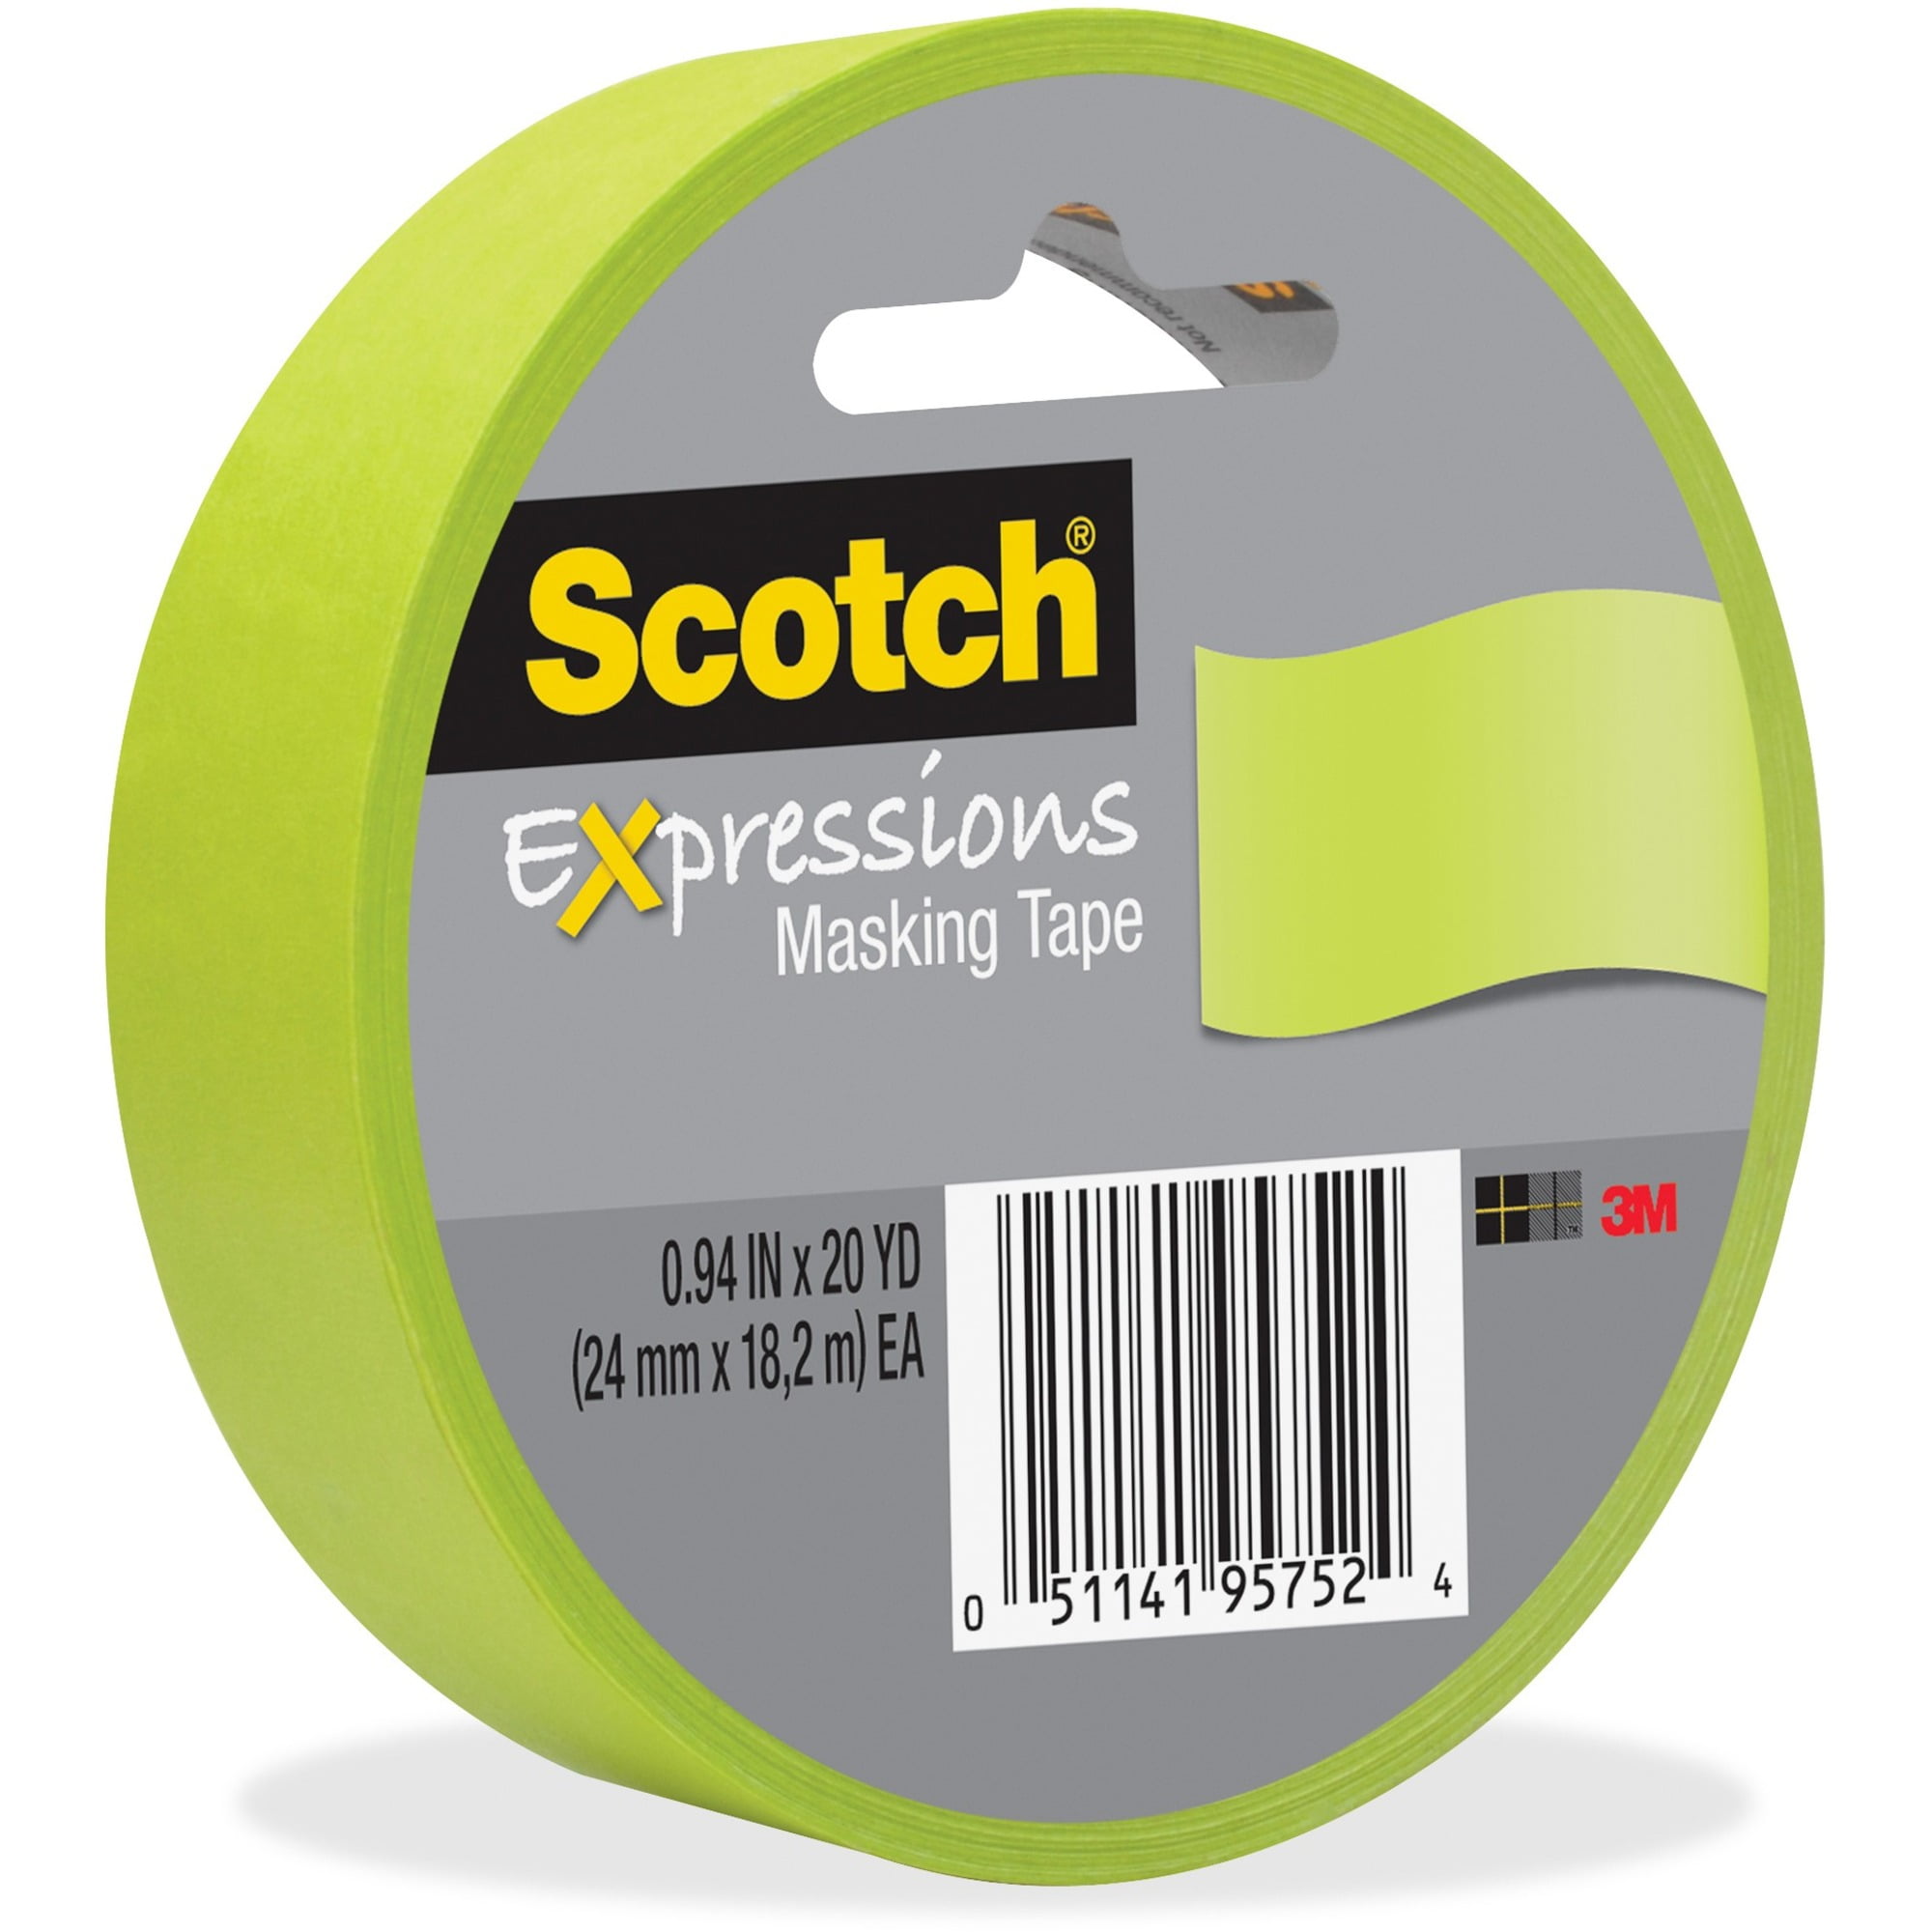 Scotch Expressions Masking Tape .94 in x 20 yds New Sealed Single Roll 3M Red 